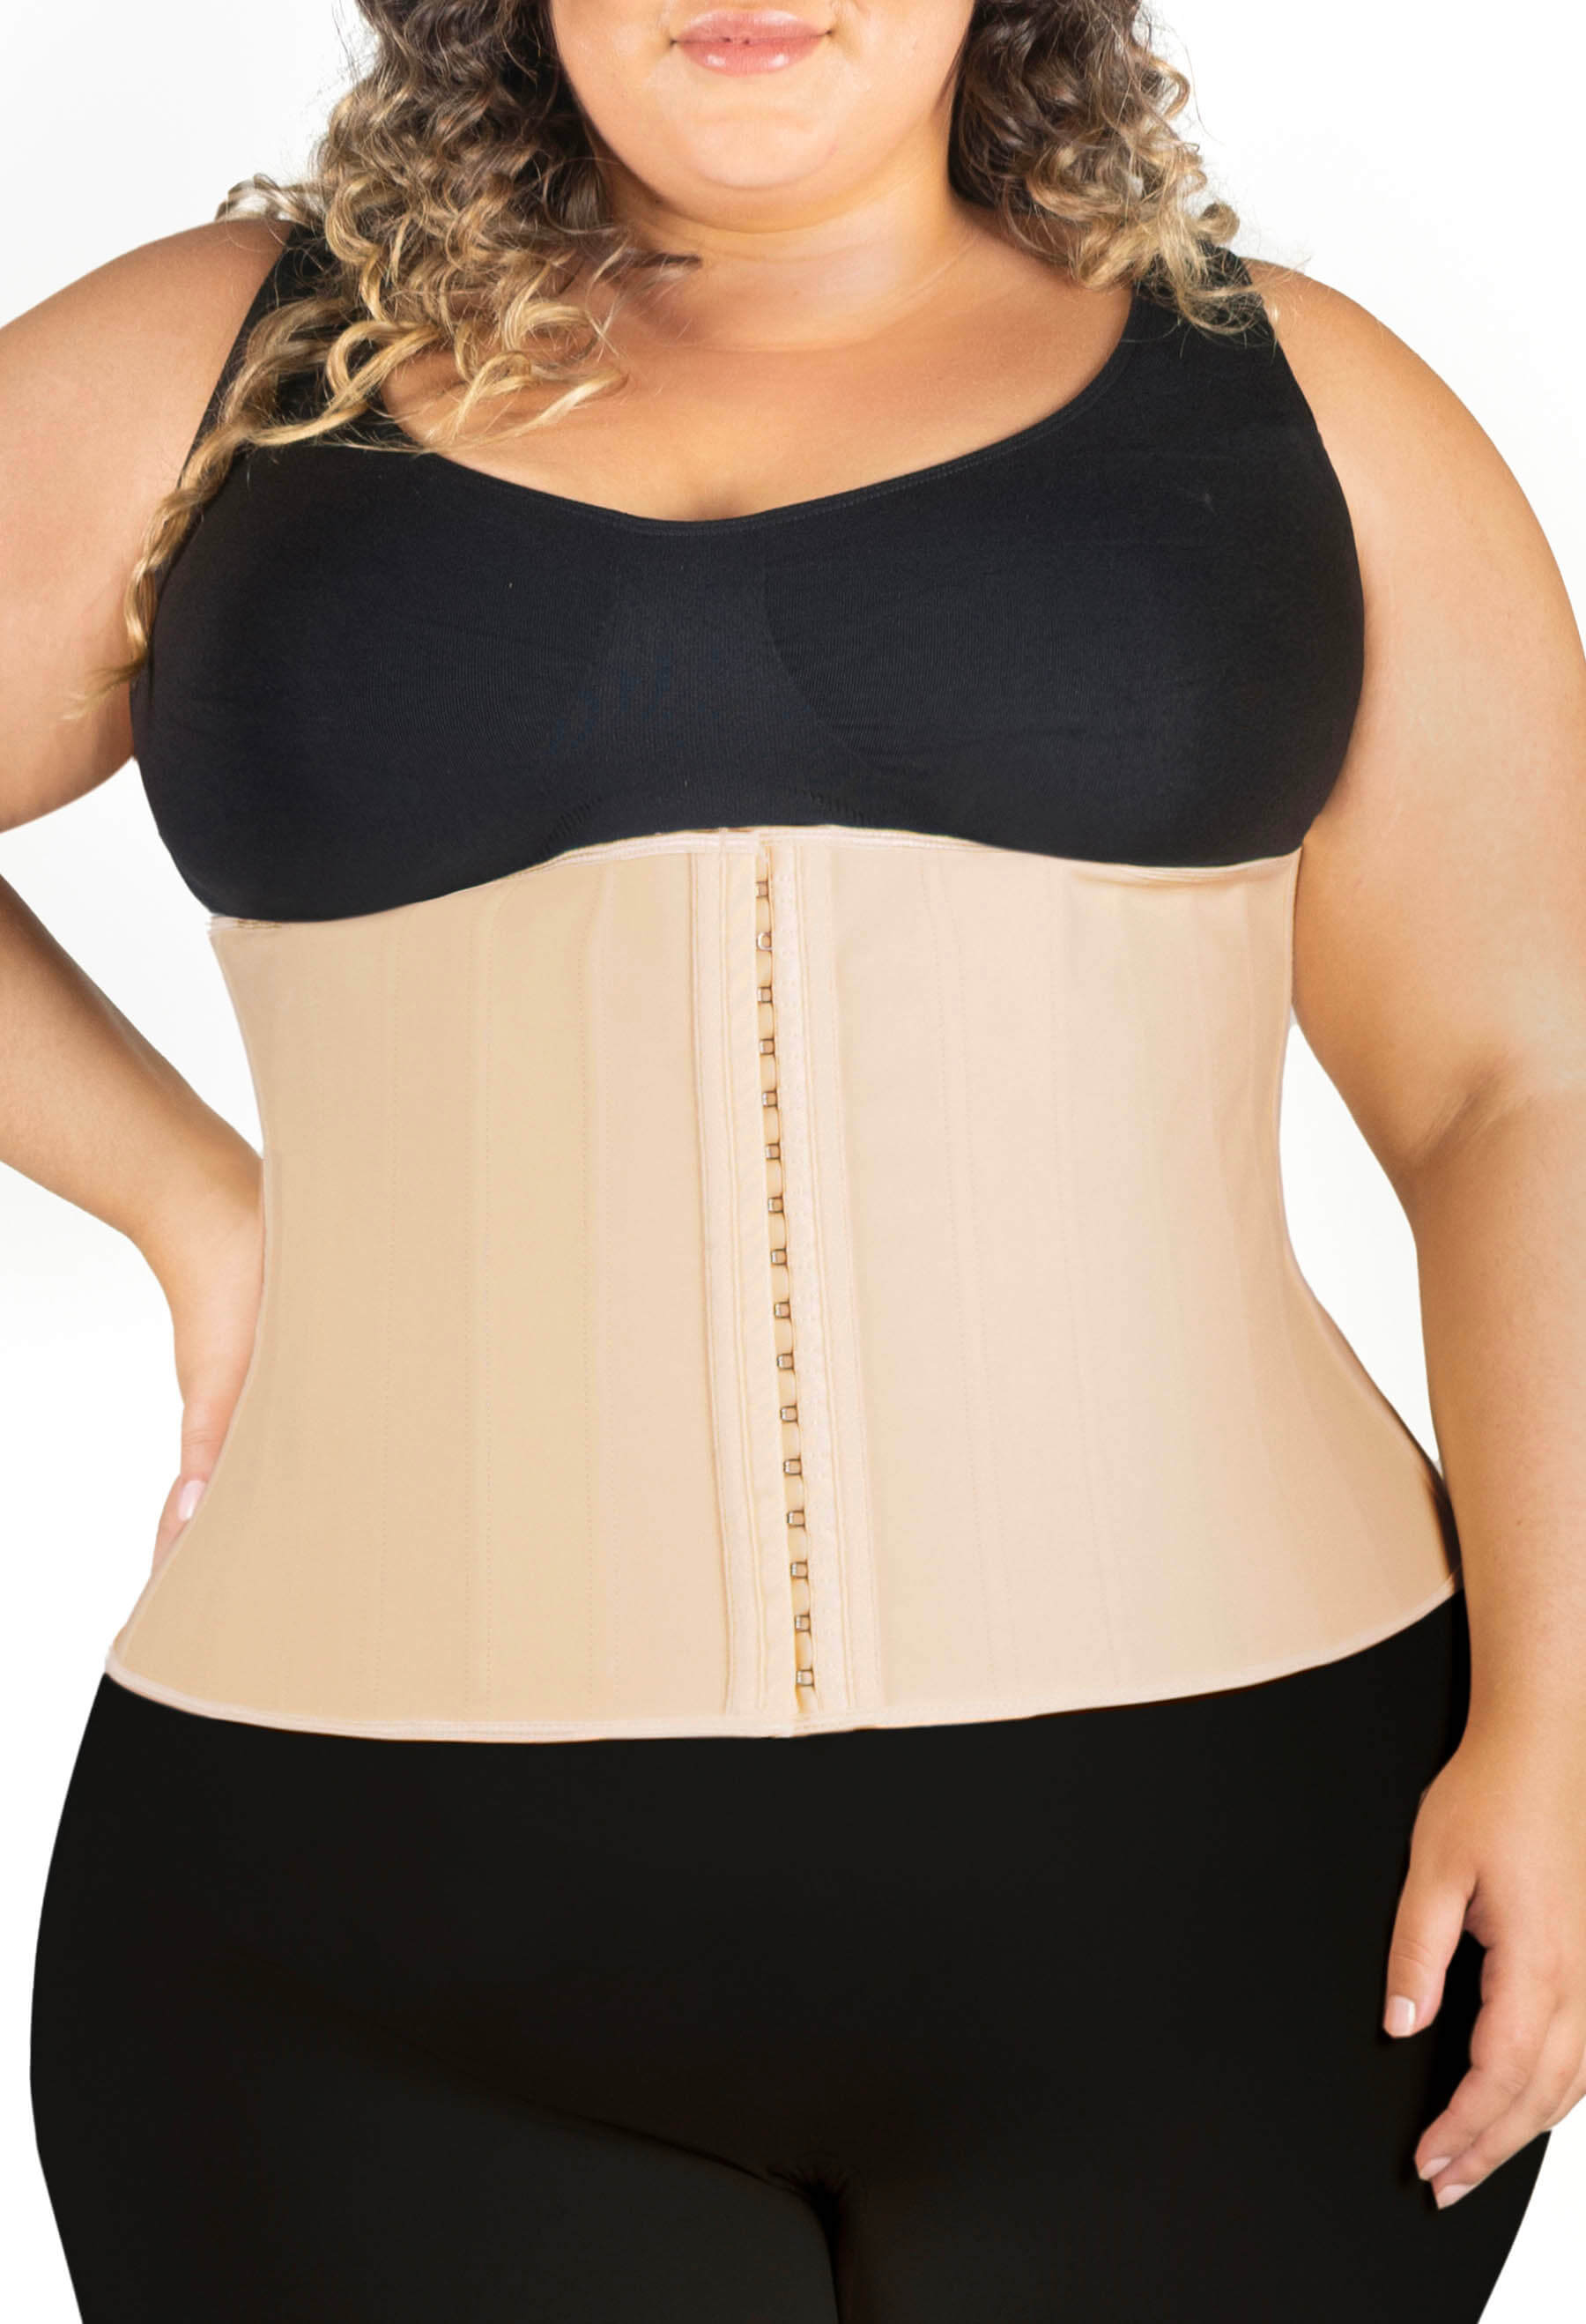 21 inch waist with corset - 18 inches was ideal